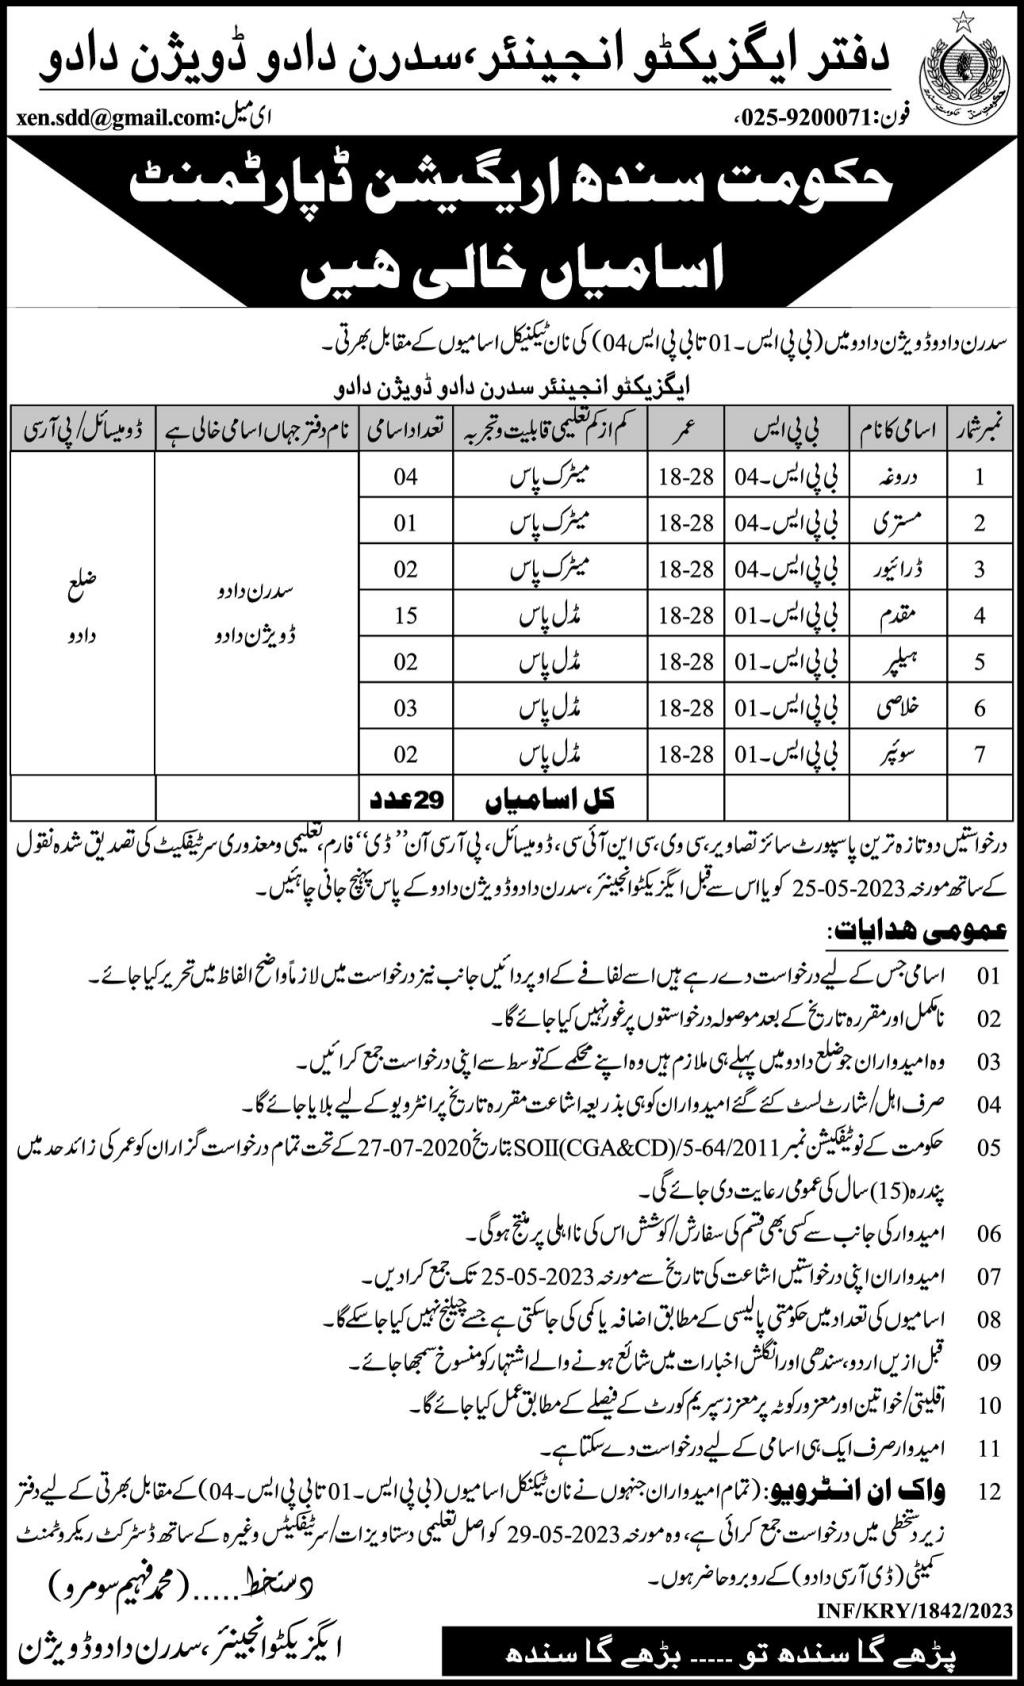 Sindh Irrigation Department BPS-01 to BPS-04 Non-Technical Vacancies